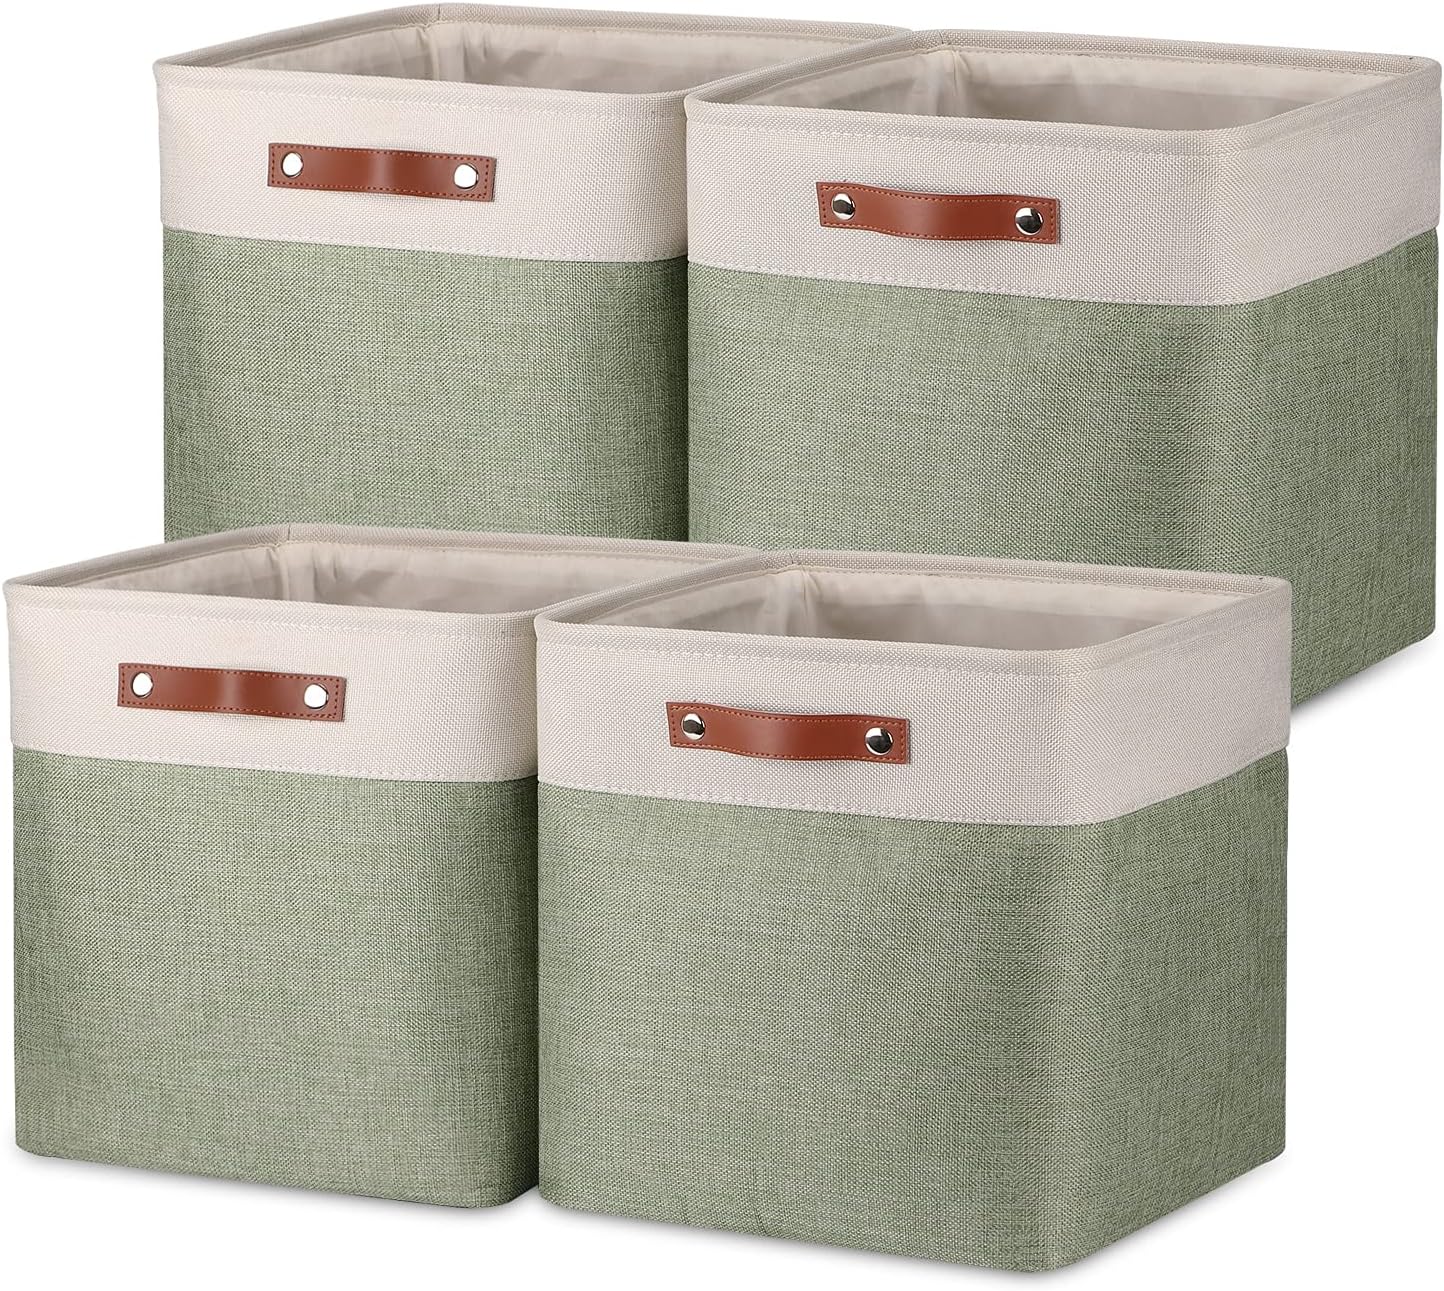 Temary Cube Storage Baskets for Shelves 4pack Fabric Storage Basket for Organizing Toys, Clothes, 13 Inch Storage Cubes with Leather Handles, Closet Baskets Nursery Home (White&Green)